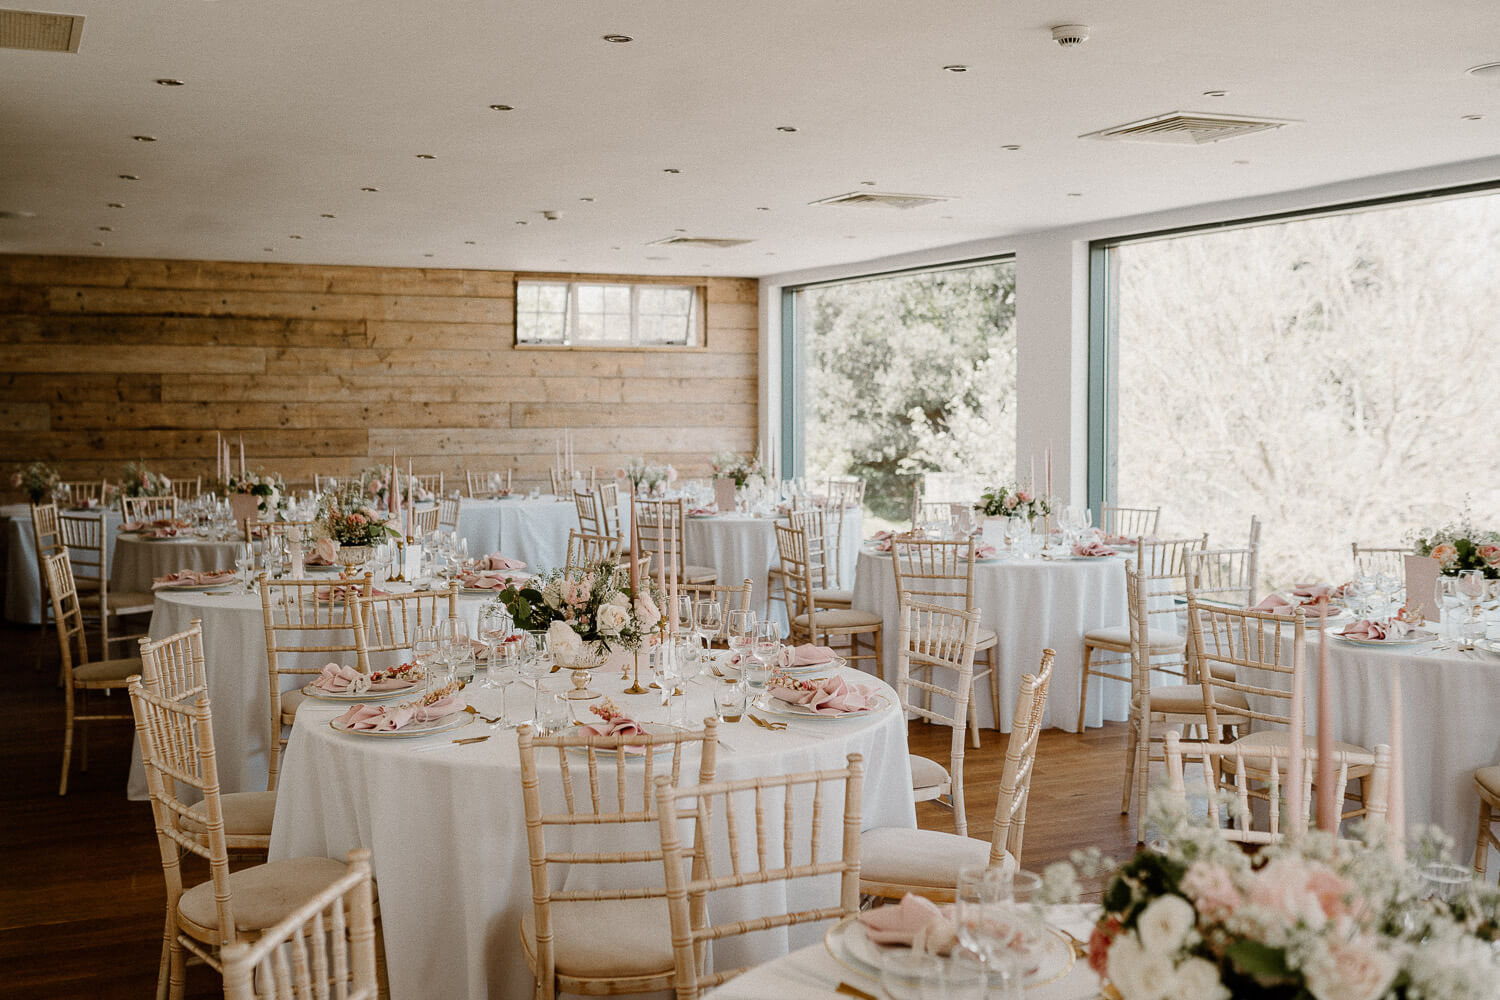 Beautifully styled reception space in a converted barn at Kingston Estate decorated in pinks and golds.